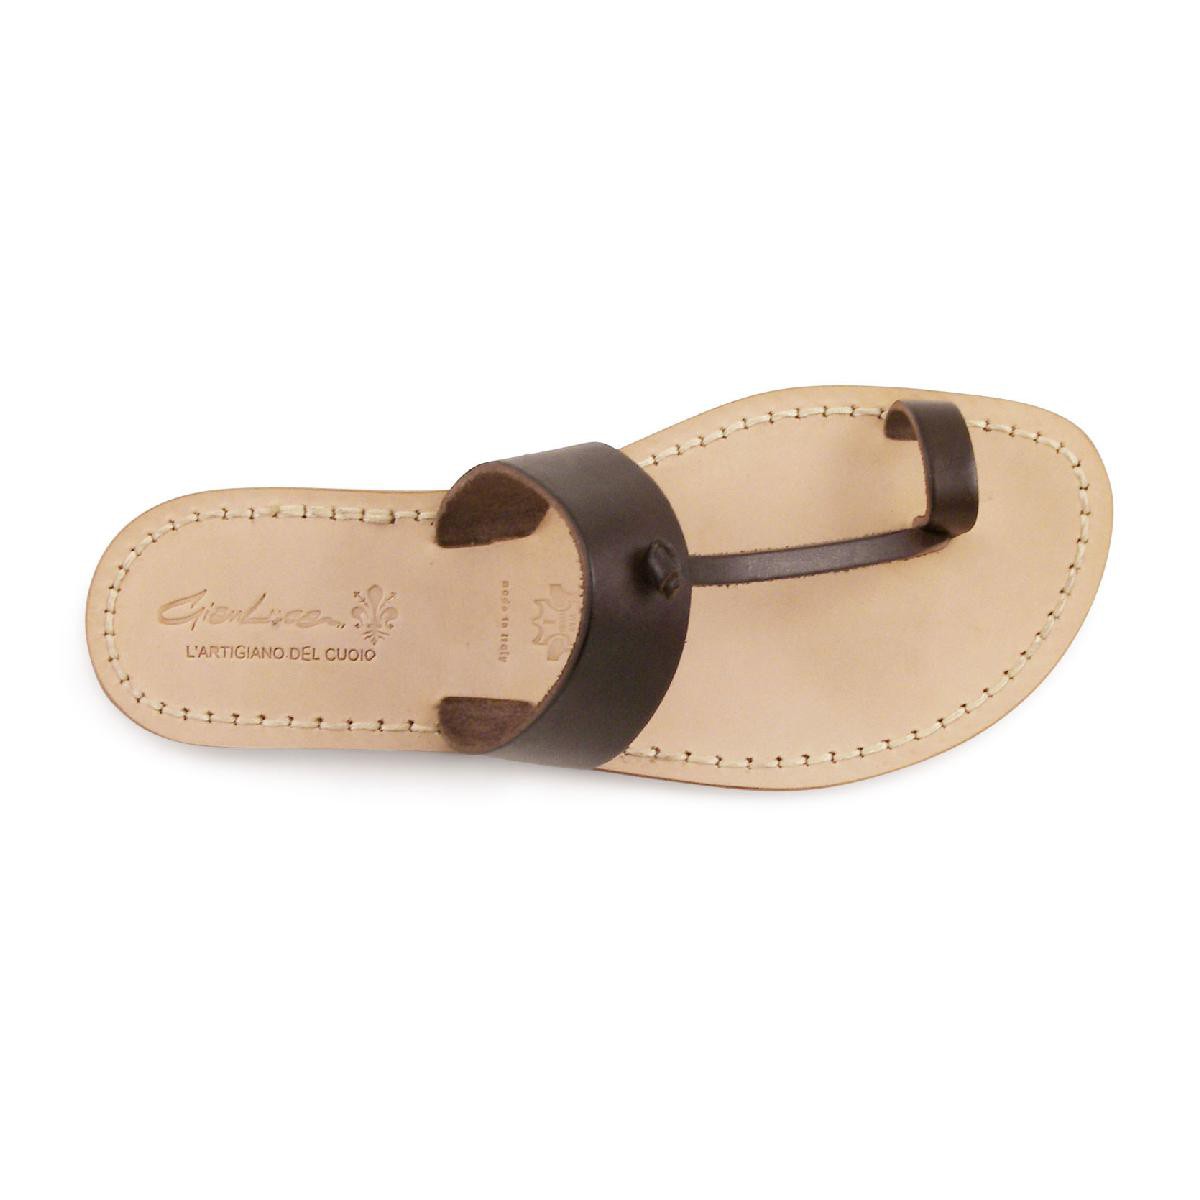 Brown leather thong sandals Handmade in Italy | The leather craftsmen